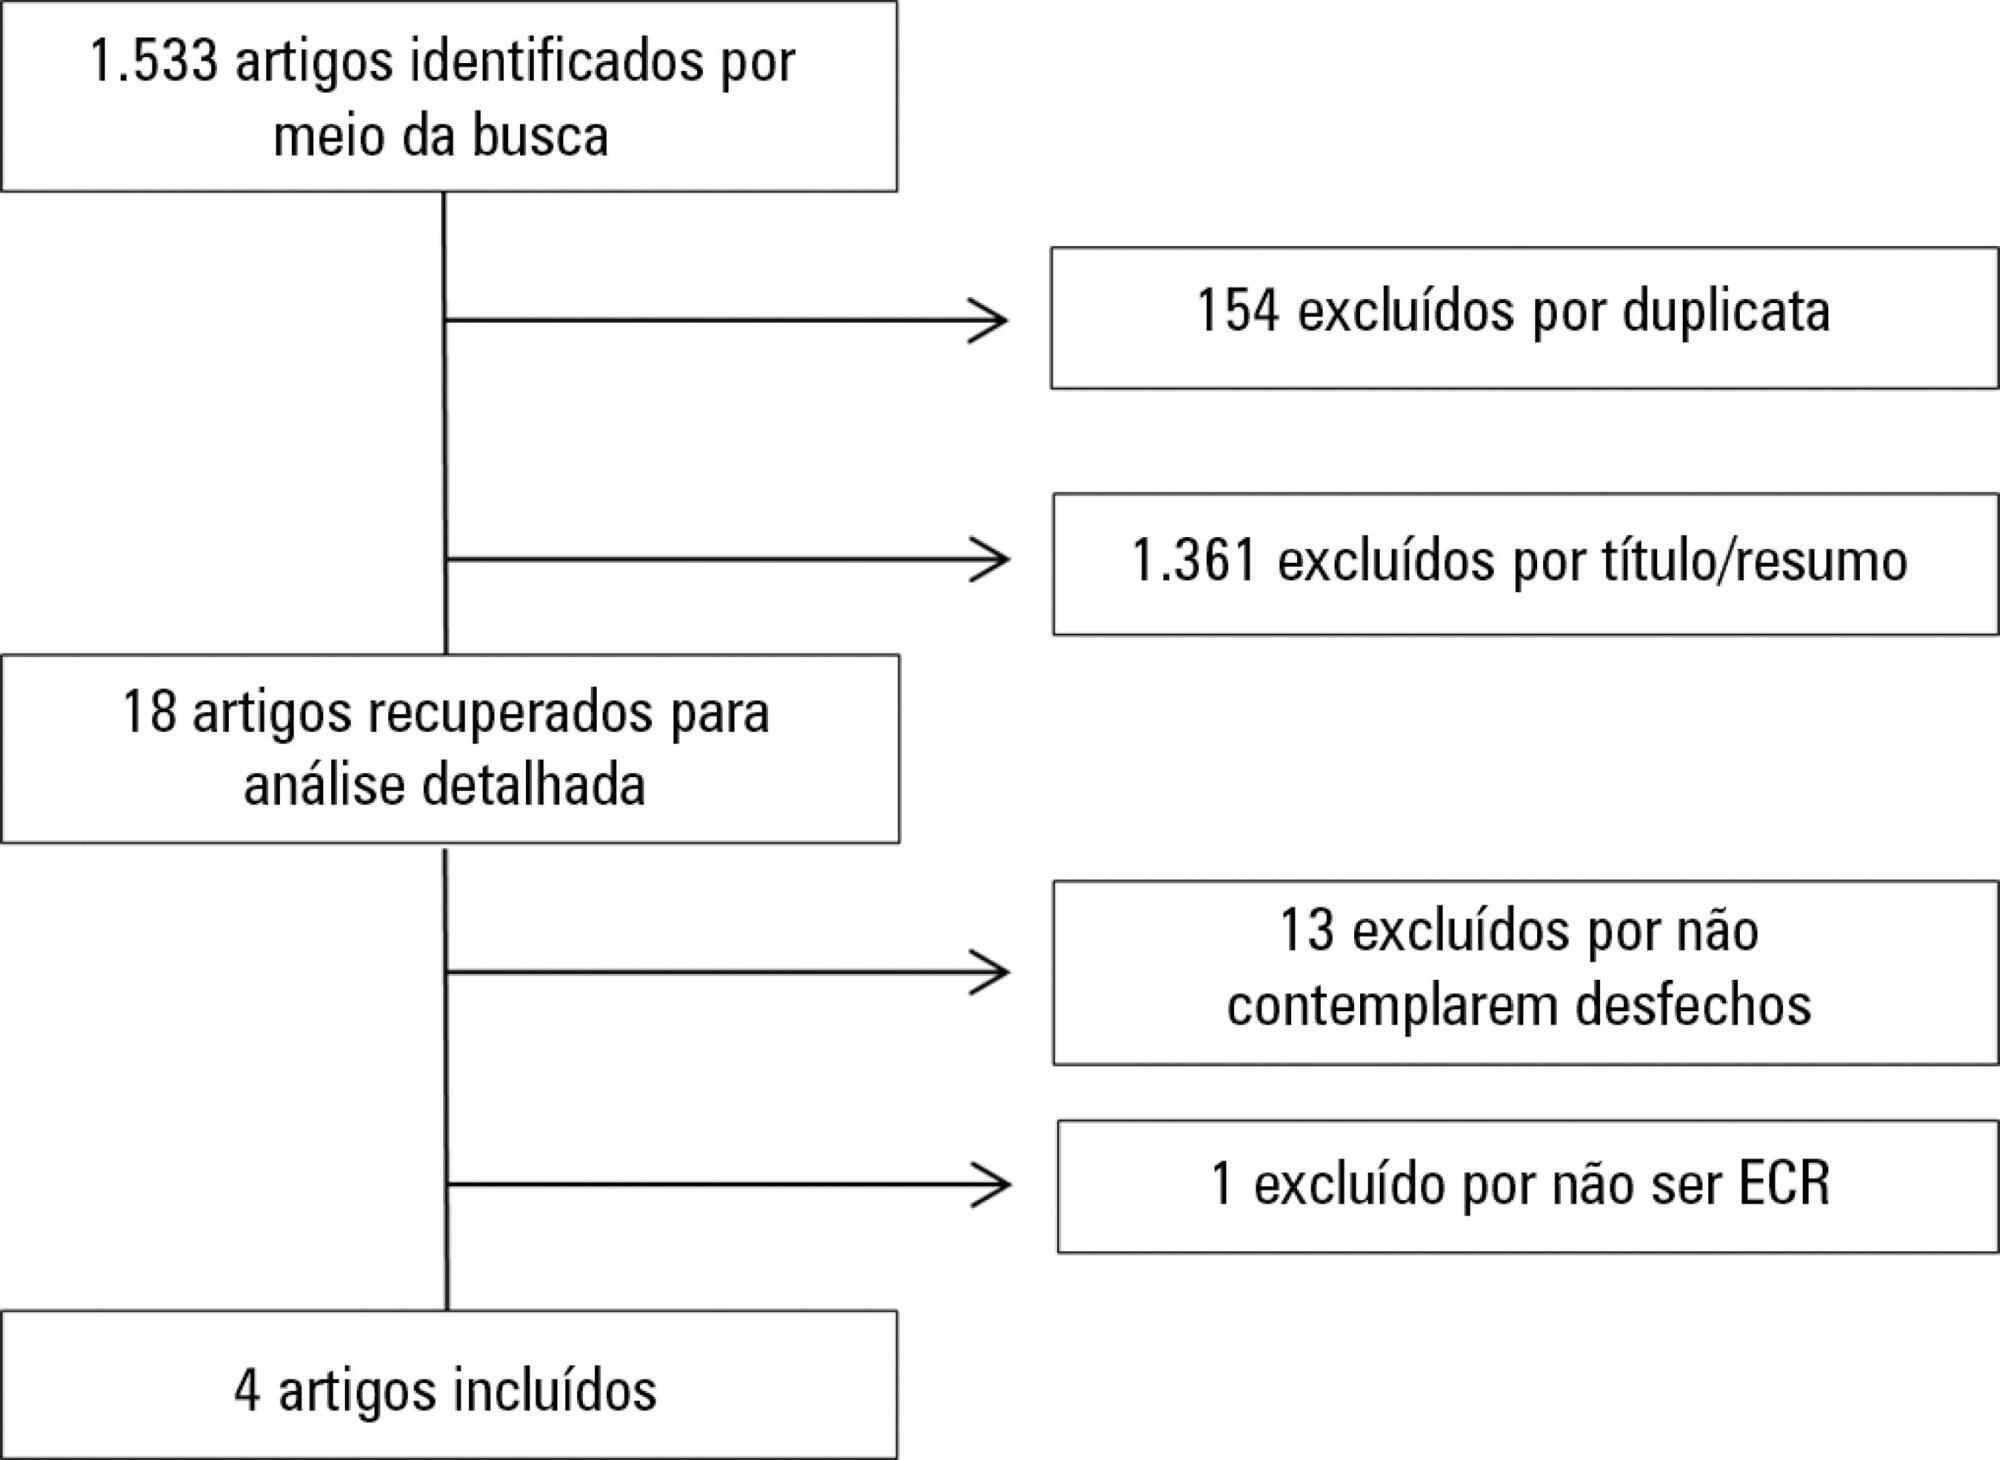 Safety of neuromuscular electrical stimulation among critically ill patients: systematic review